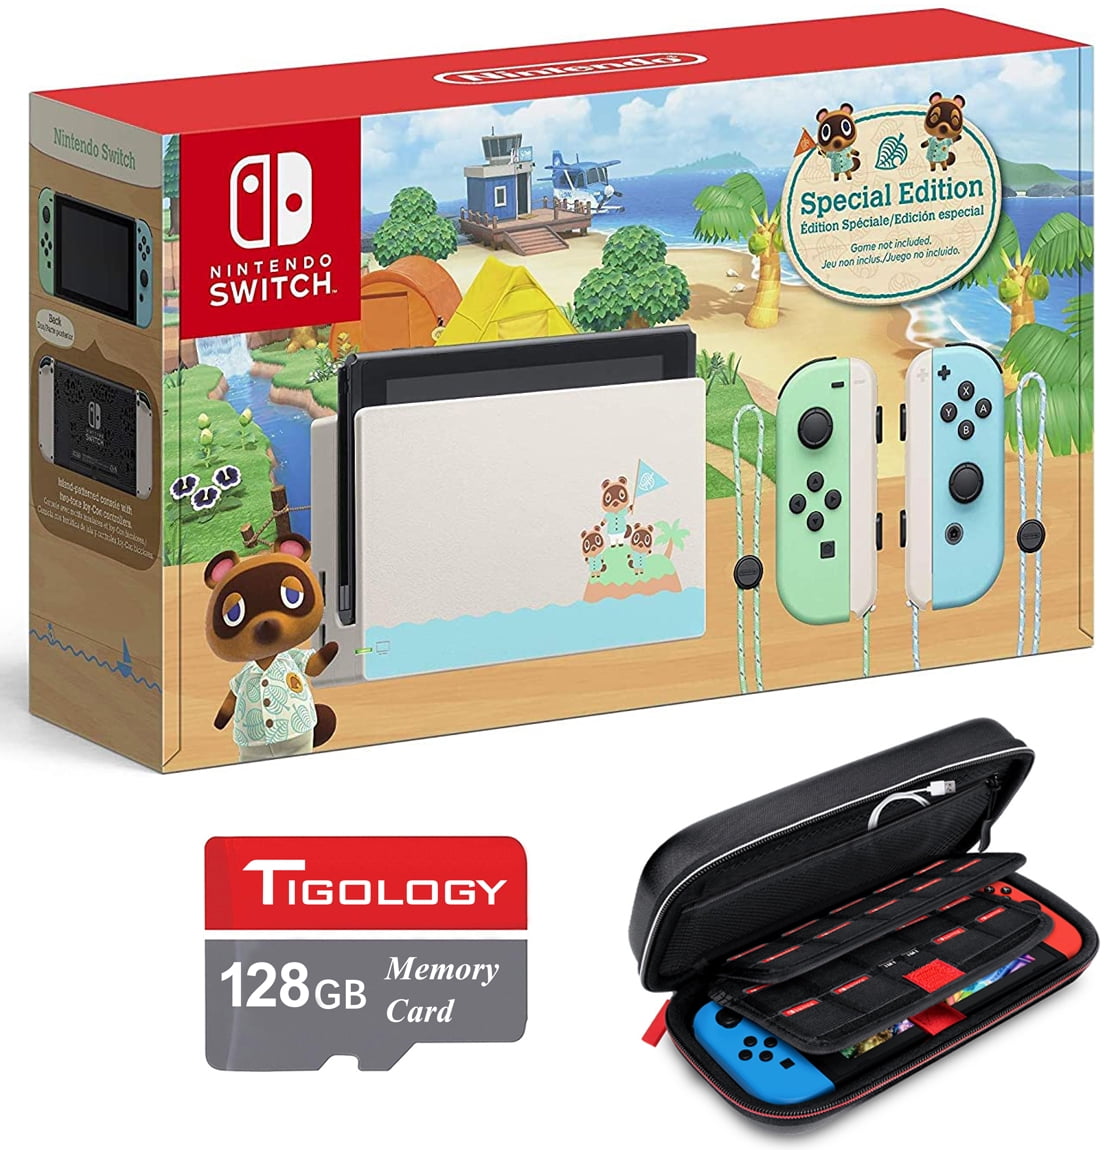 Nintendo Switch Animal Crossing New Horizons Edition 32GB Console with  Tigology 128GB Memory Card with Adapter and Tigology PU Travel Case with 31  Cards Storge 